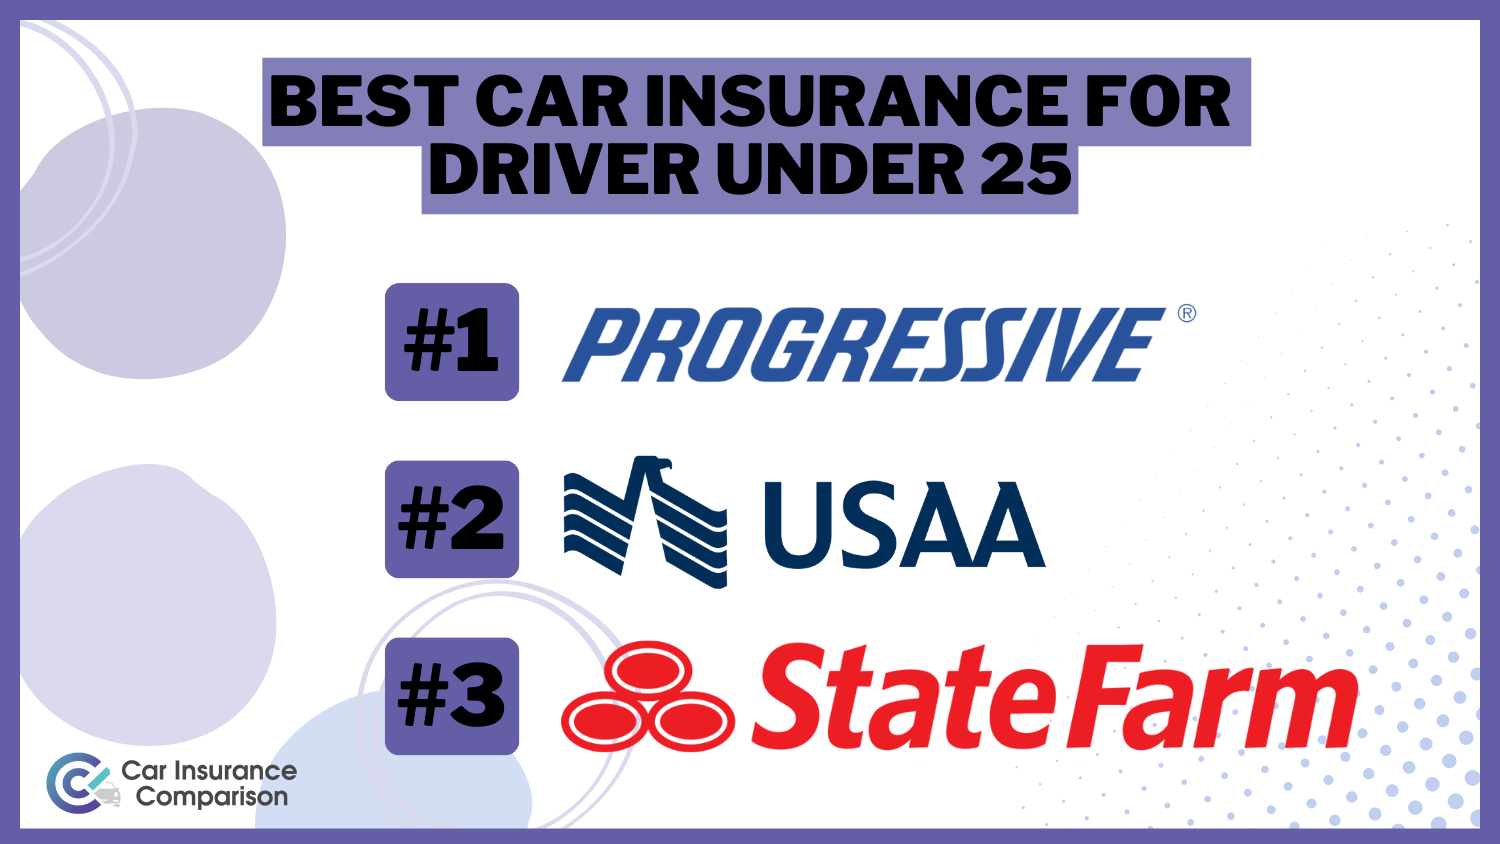 Best Car Insurance For Drivers Under 25 : Progressive, USAA, State Farm